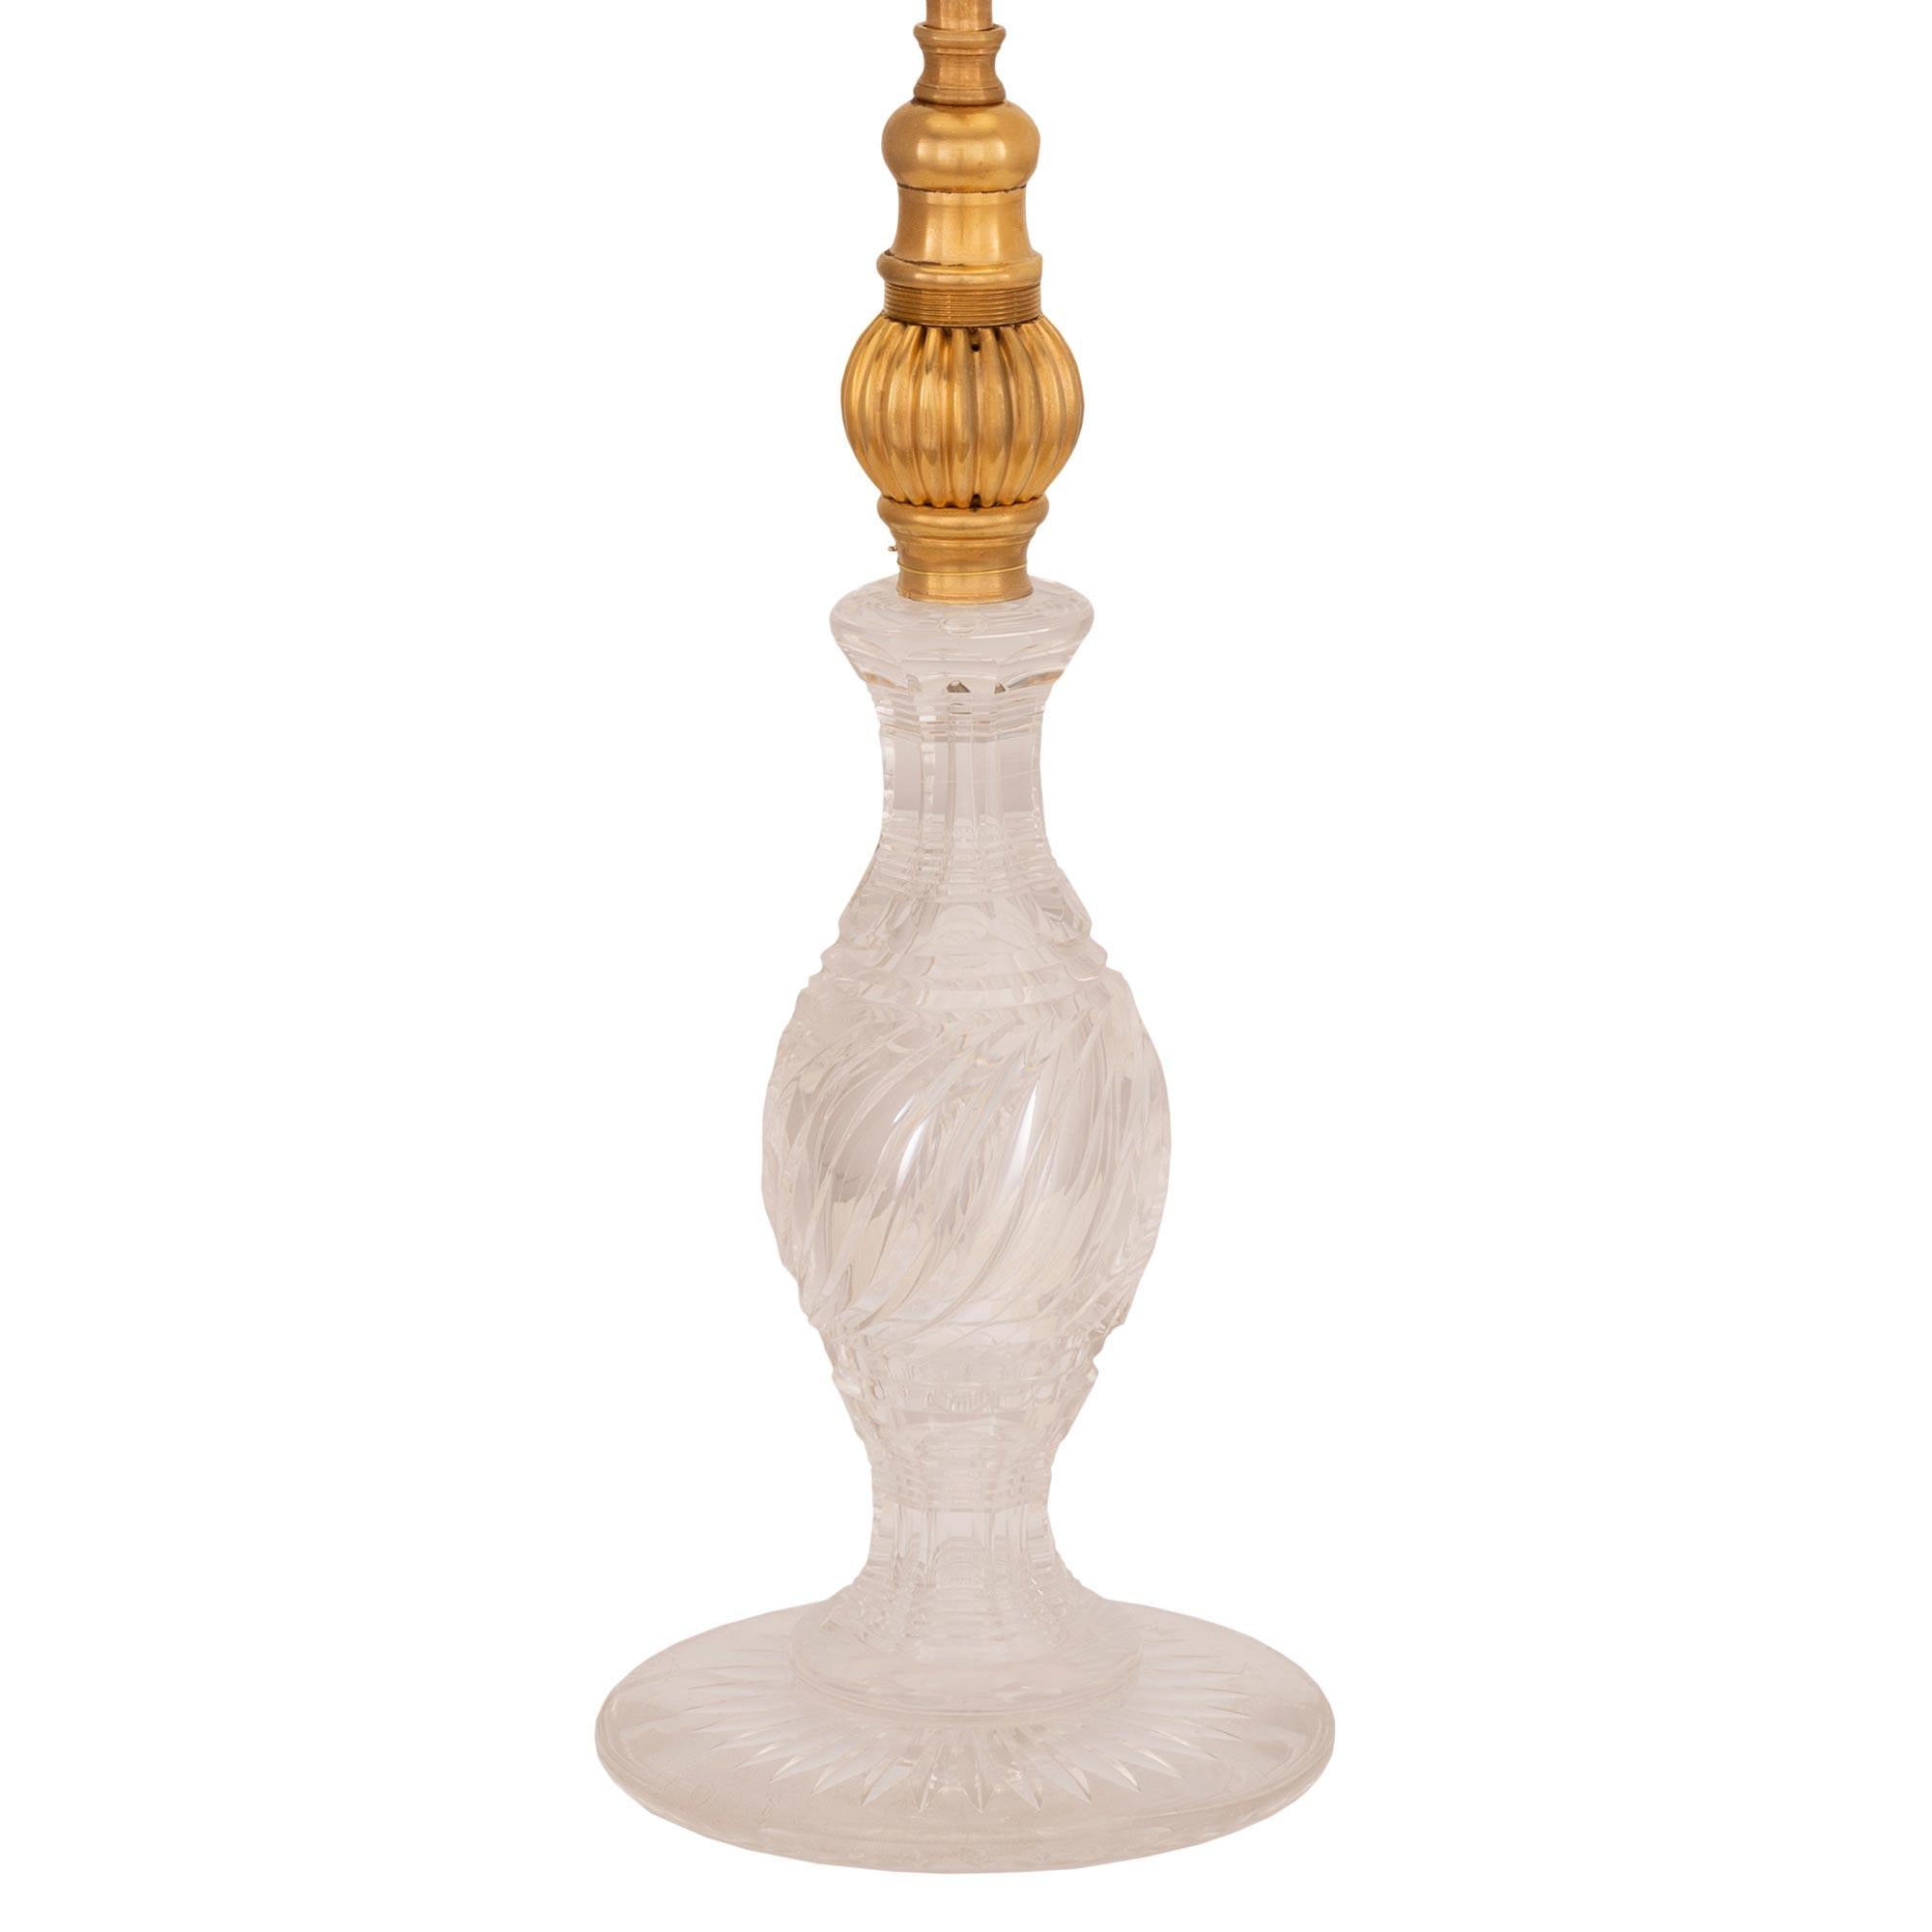 A charming French 19th century Louis XVI st. Baccarat crystal and ormolu lamp. The lamp is raised by a striking and most decorative Baccarat crystal body with a lovely circular foliate designed base and a beautiful spiral fluted baluster shaped